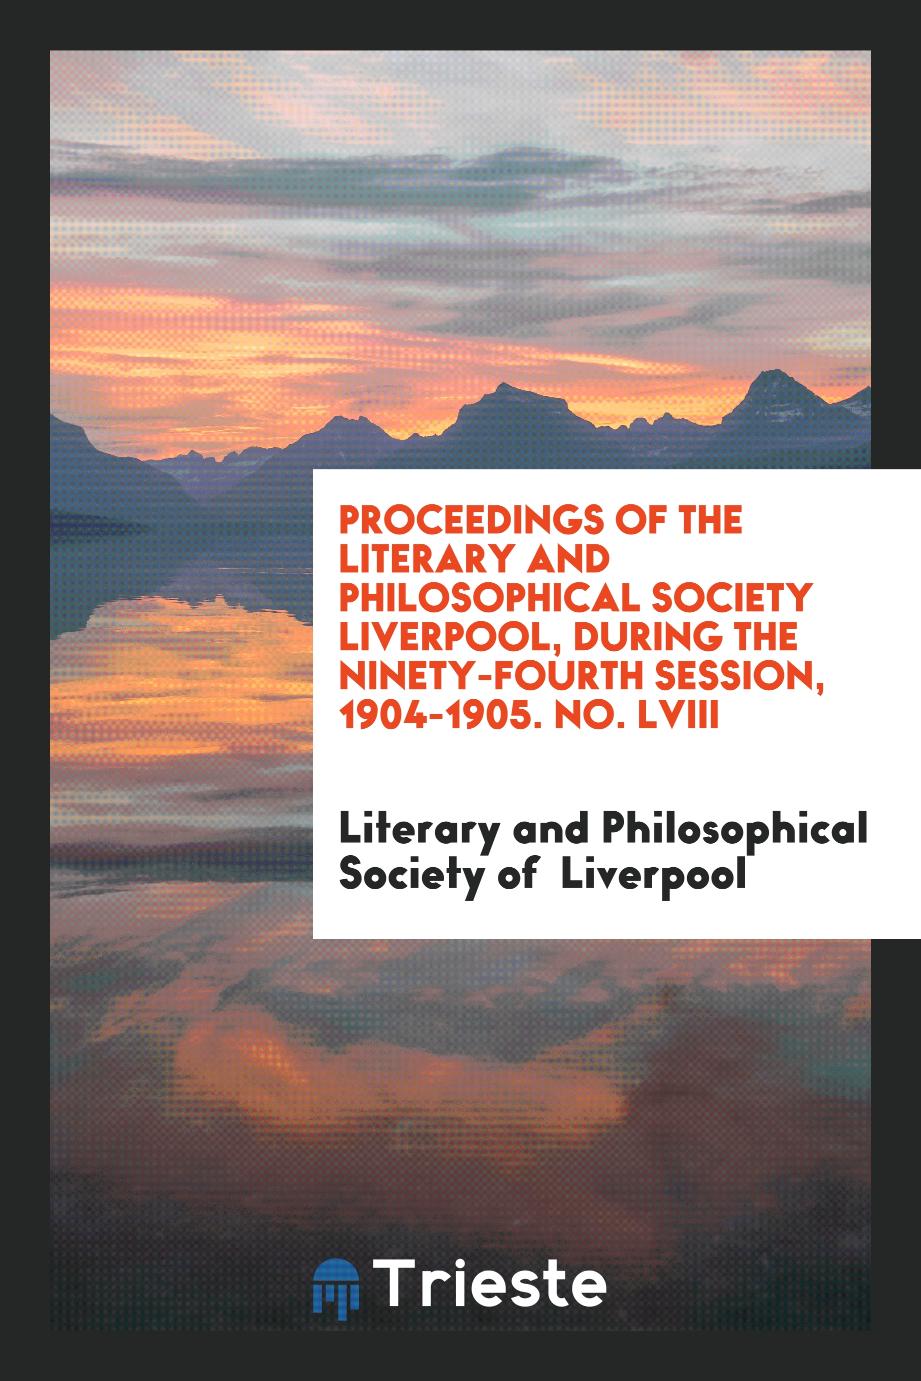 Proceedings of the Literary and Philosophical Society Liverpool, During the Ninety-Fourth Session, 1904-1905. No. LVIII